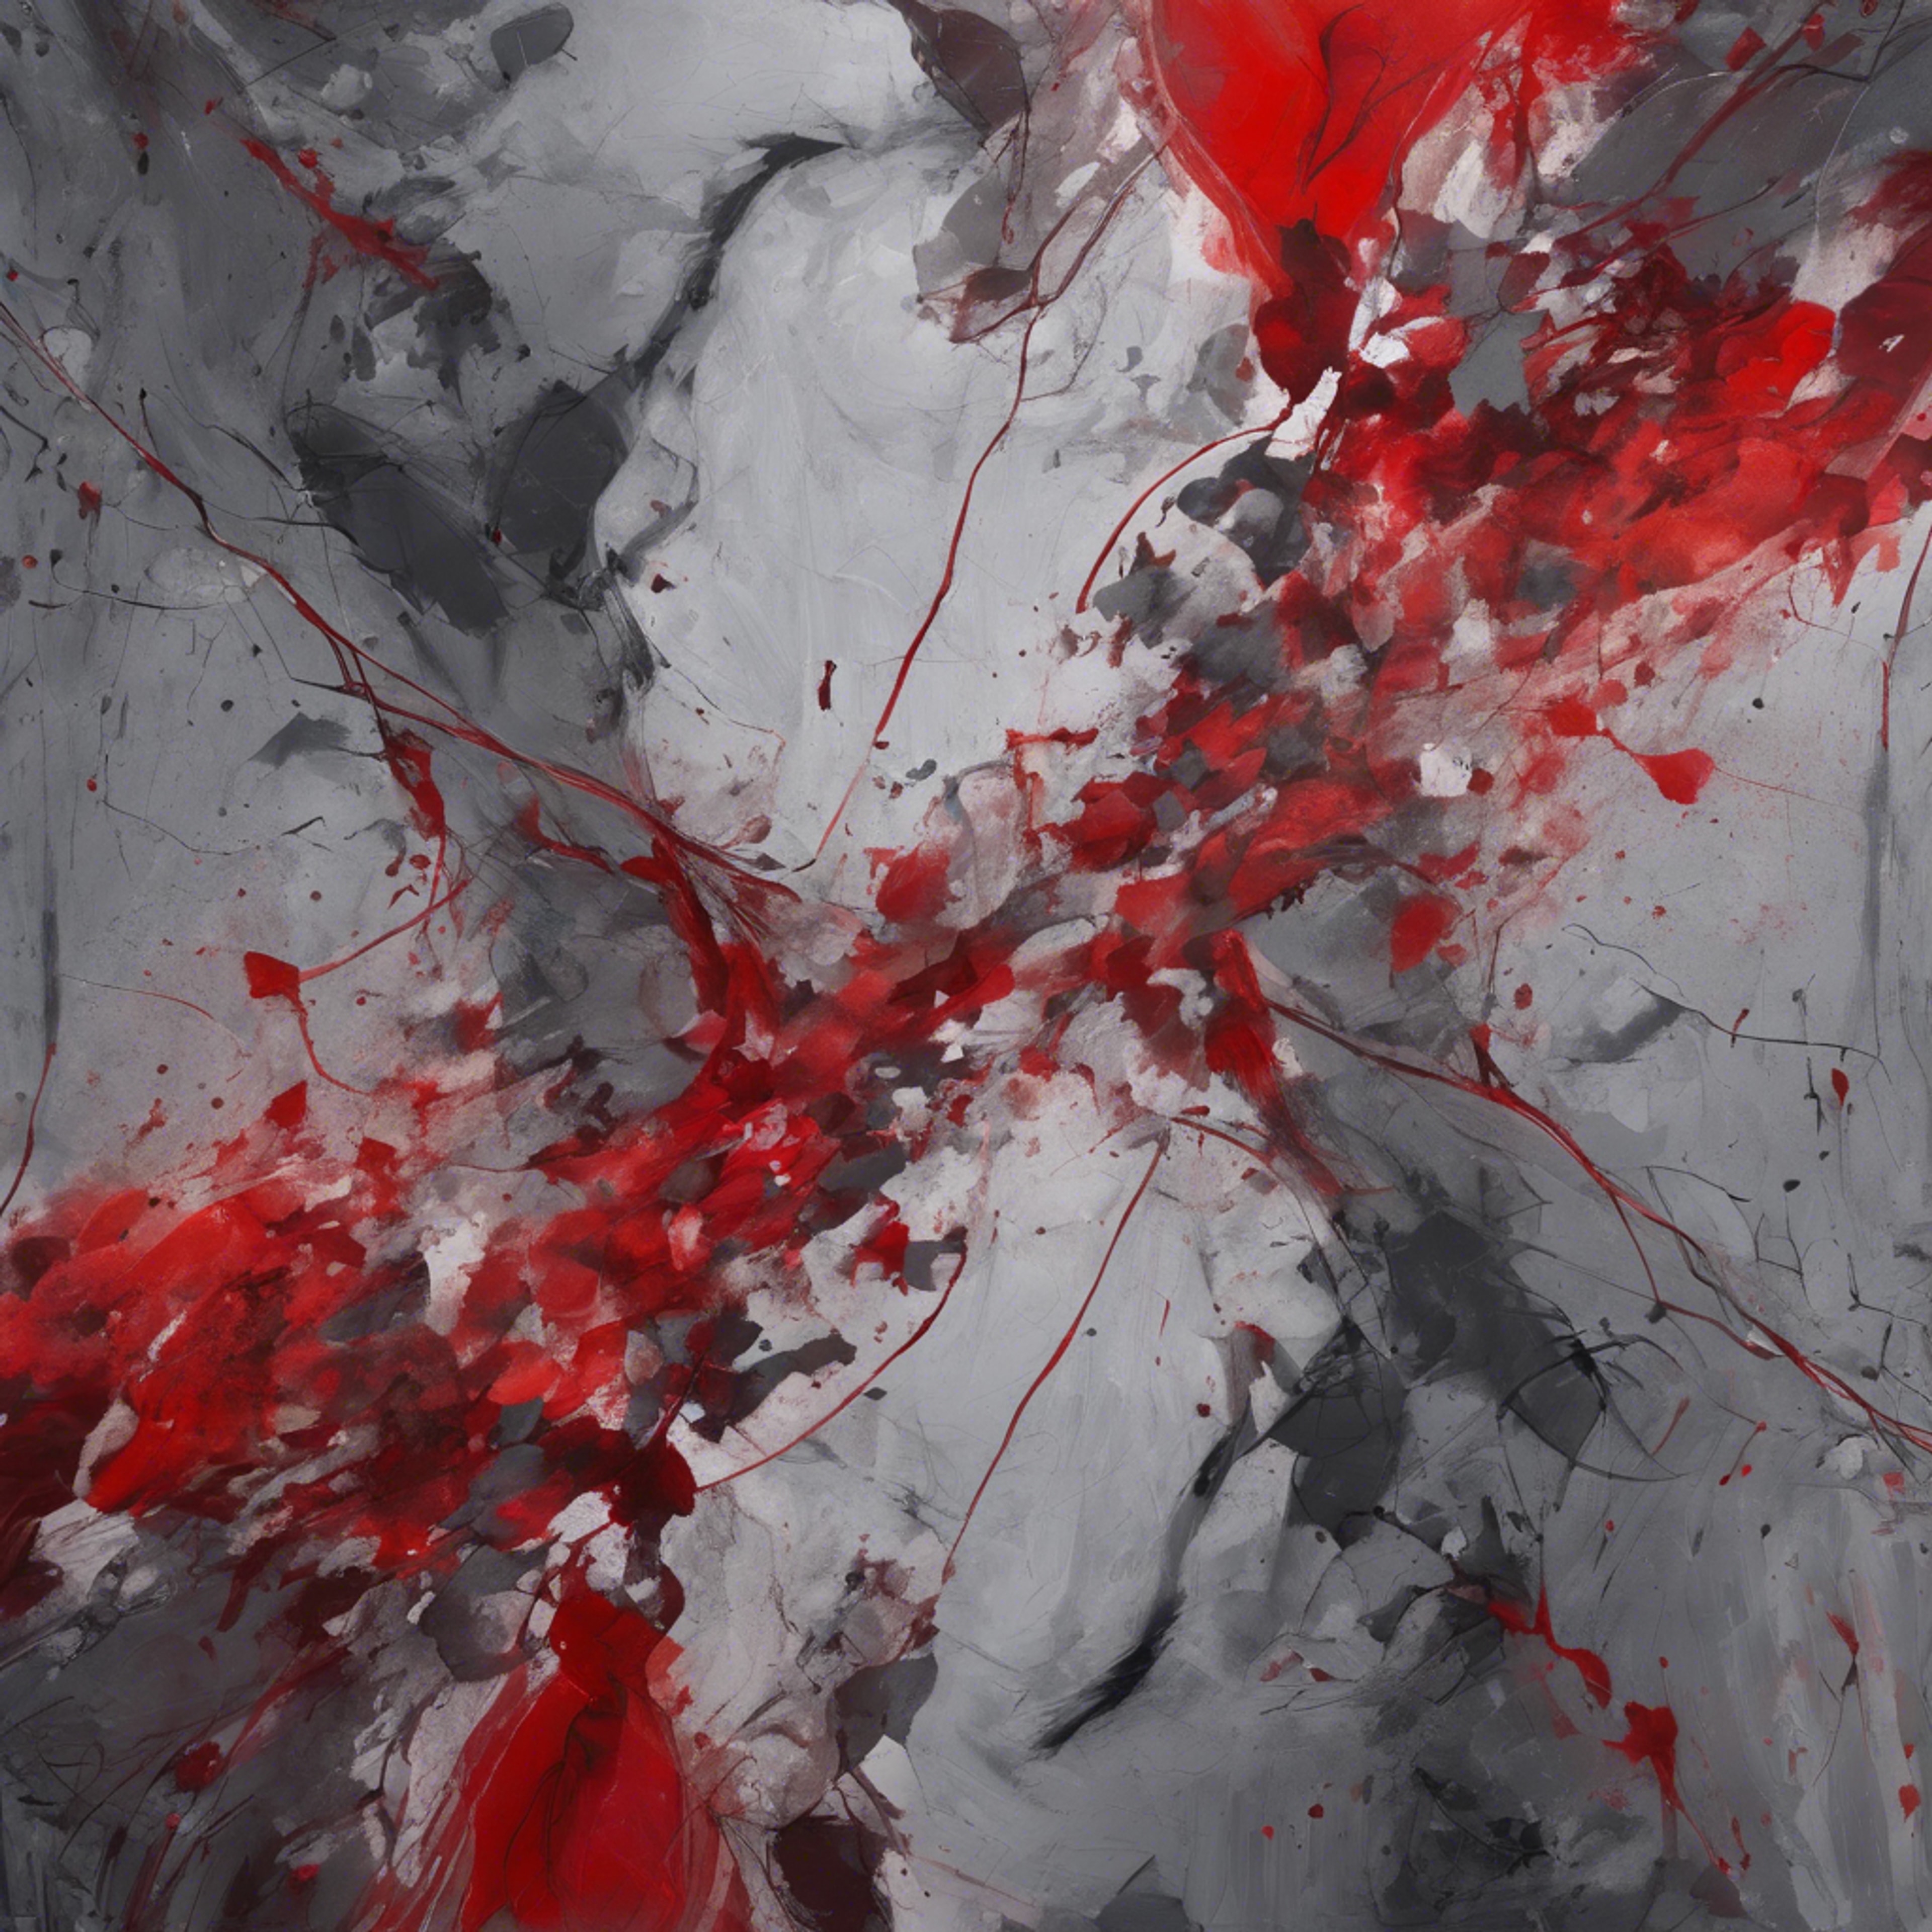 A red and gray abstract painting demonstrating the battle between passion and reason. کاغذ دیواری[fb490a5db02d428289d0]